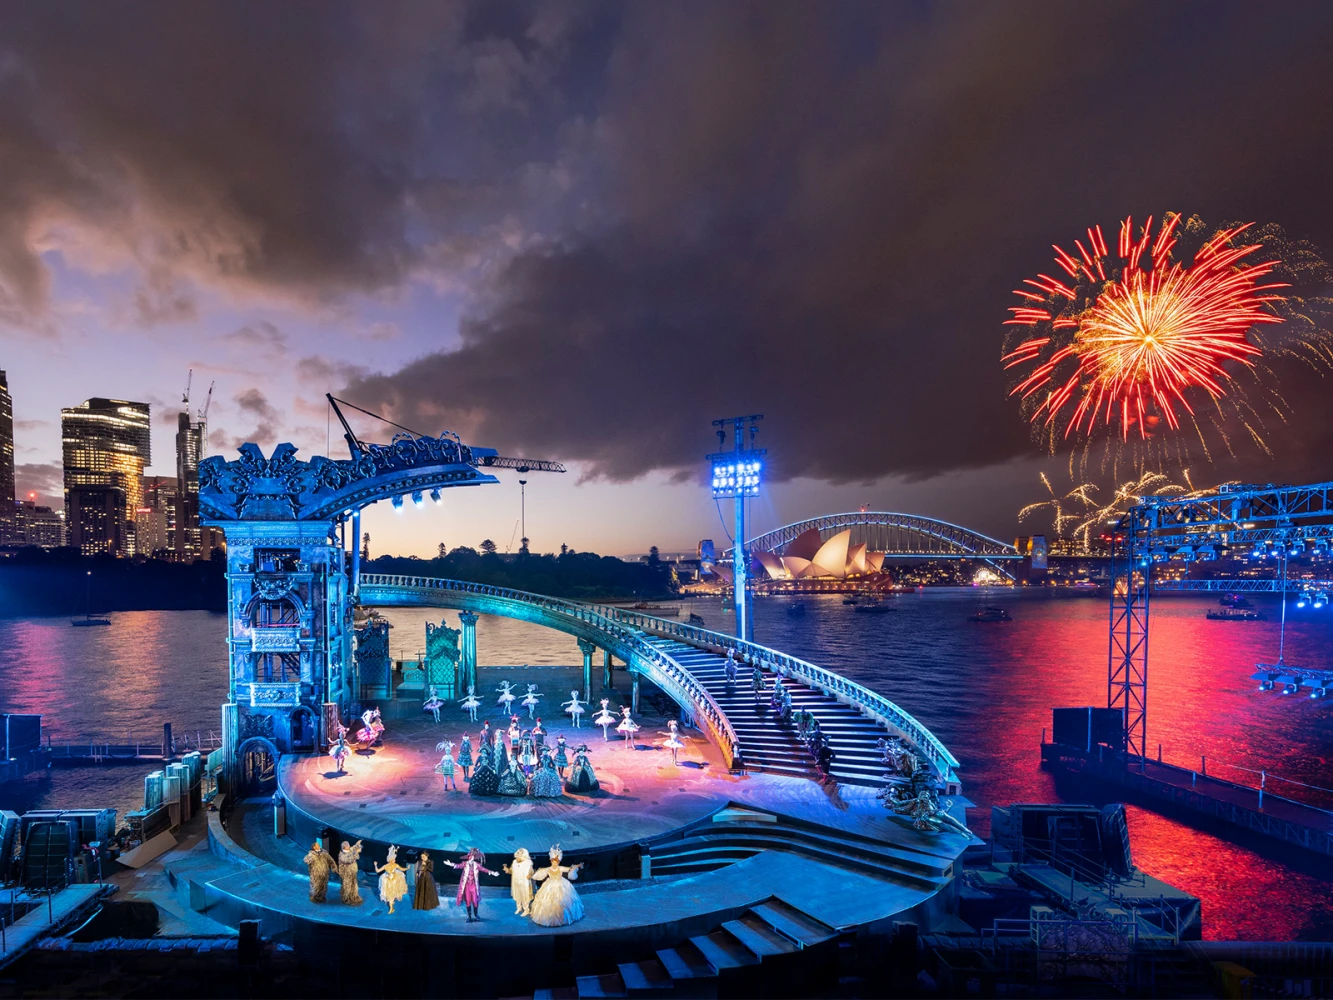 The Phantom of the Opera on Sydney Harbour: What to expect - 1